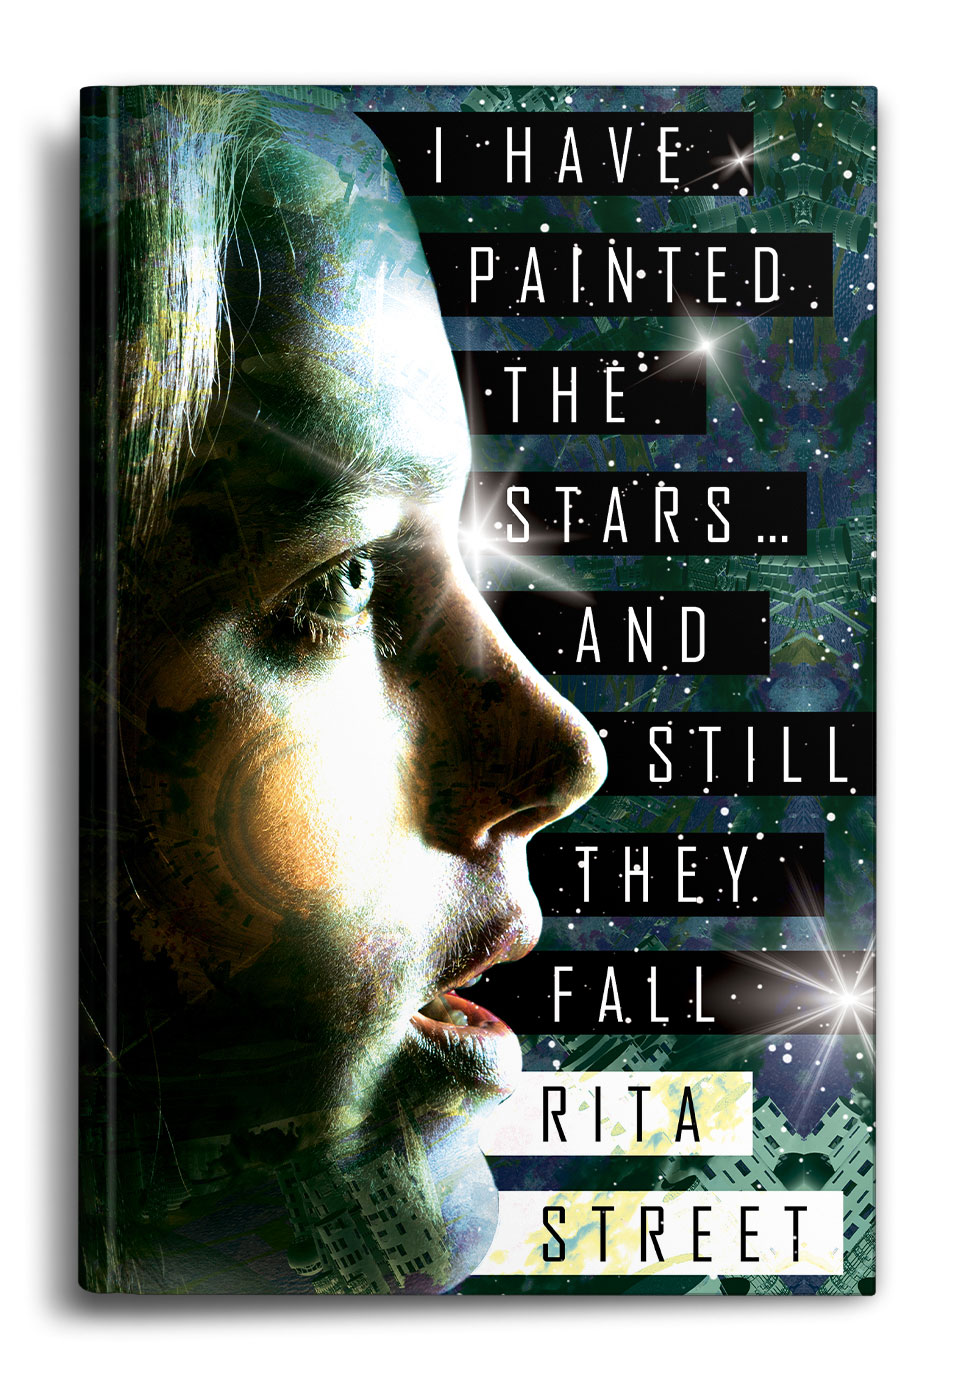 I-HAve-Painted-the-Stars-and-they-Still-Fall-by-Rita-Street